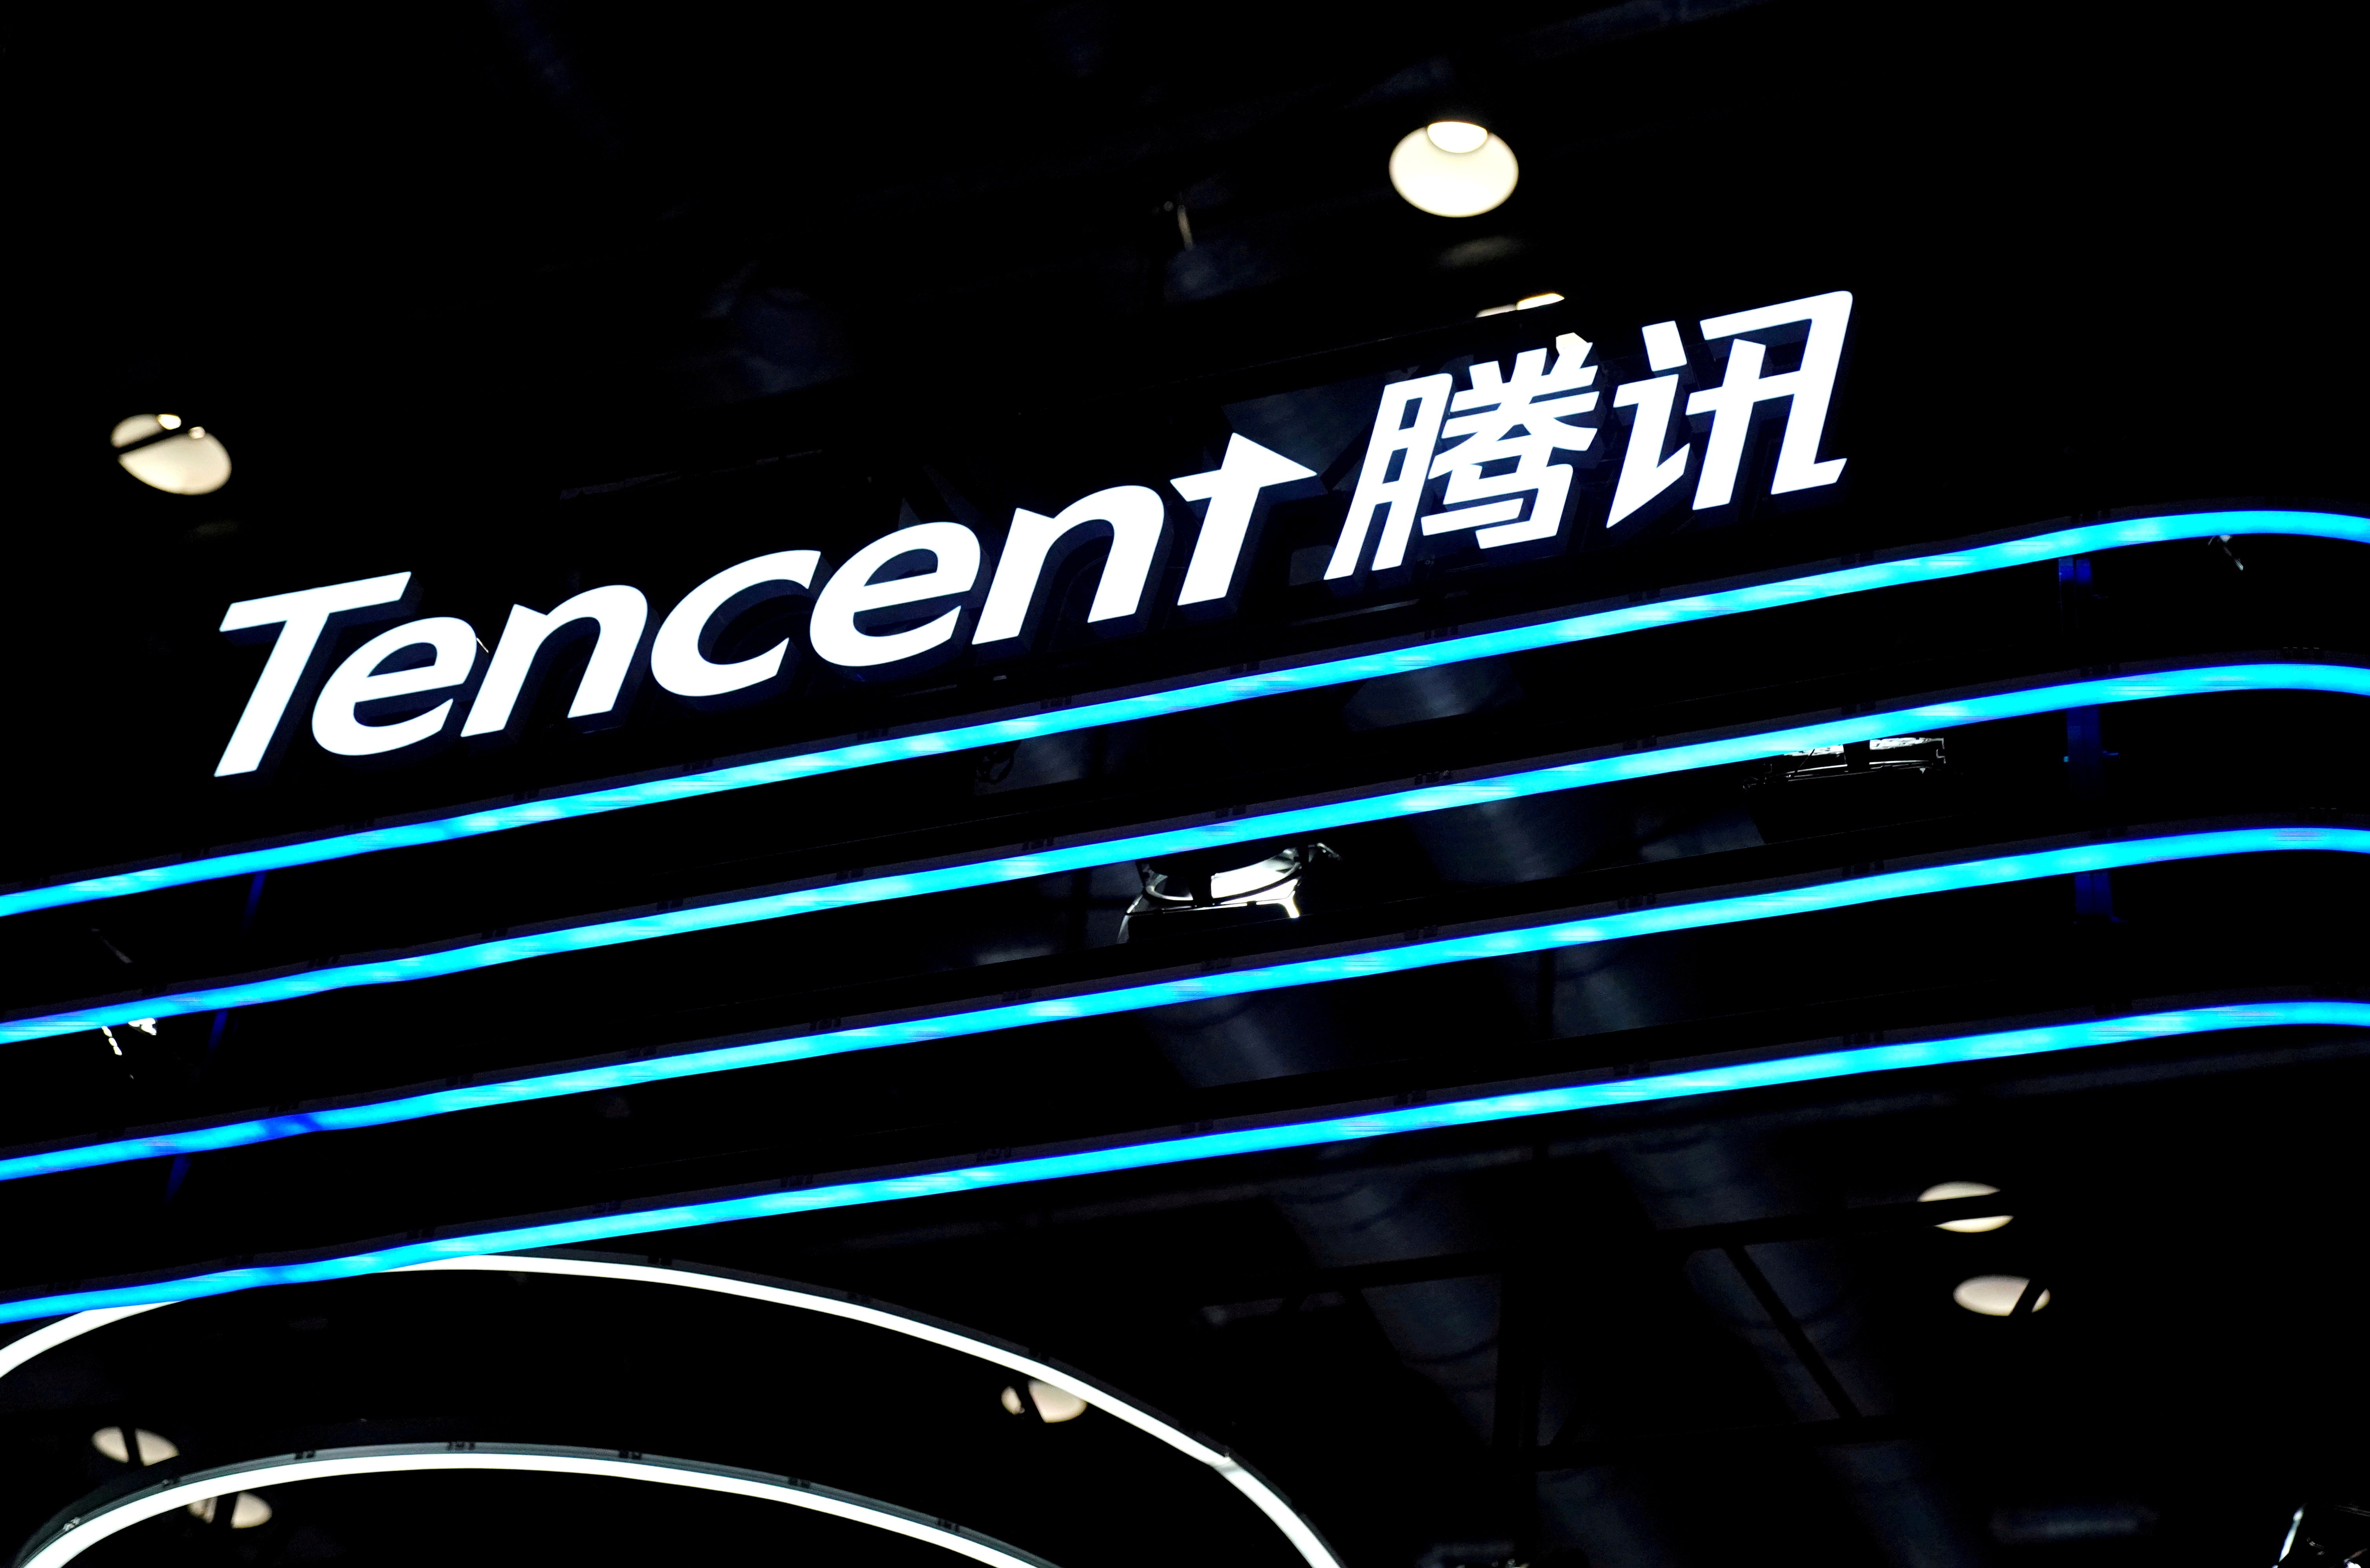 Tencent has invested in more than 800 companies, including a 12 per cent stake in Snap and 5 per cent in Tesla.